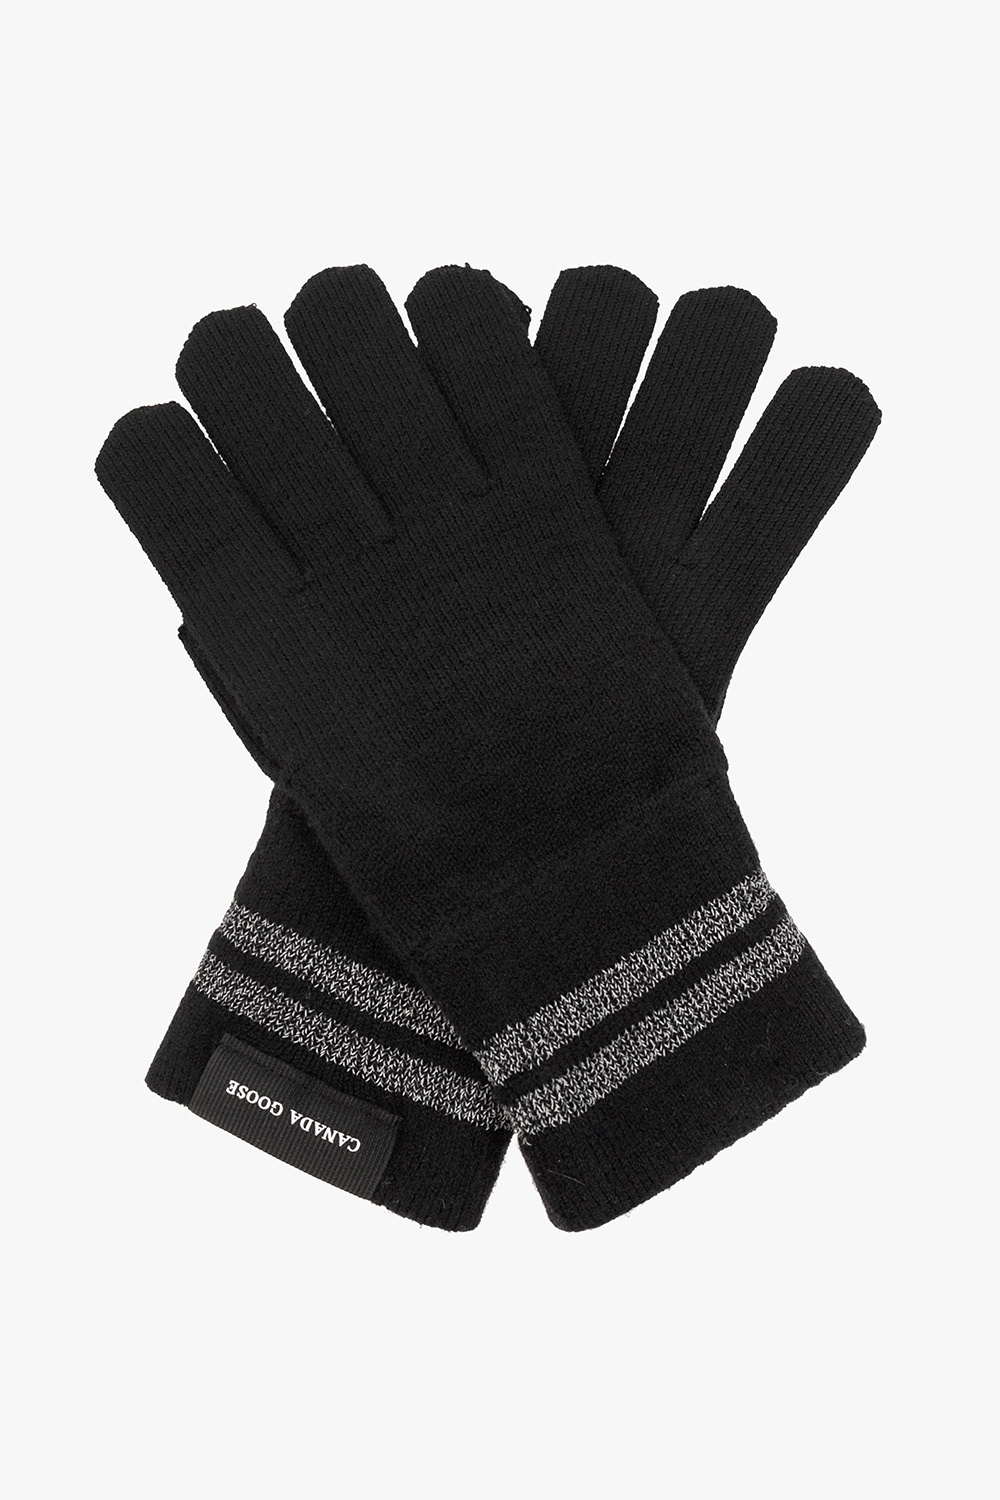 Canada Goose Gloves with reflective stripes, Women's Accessories